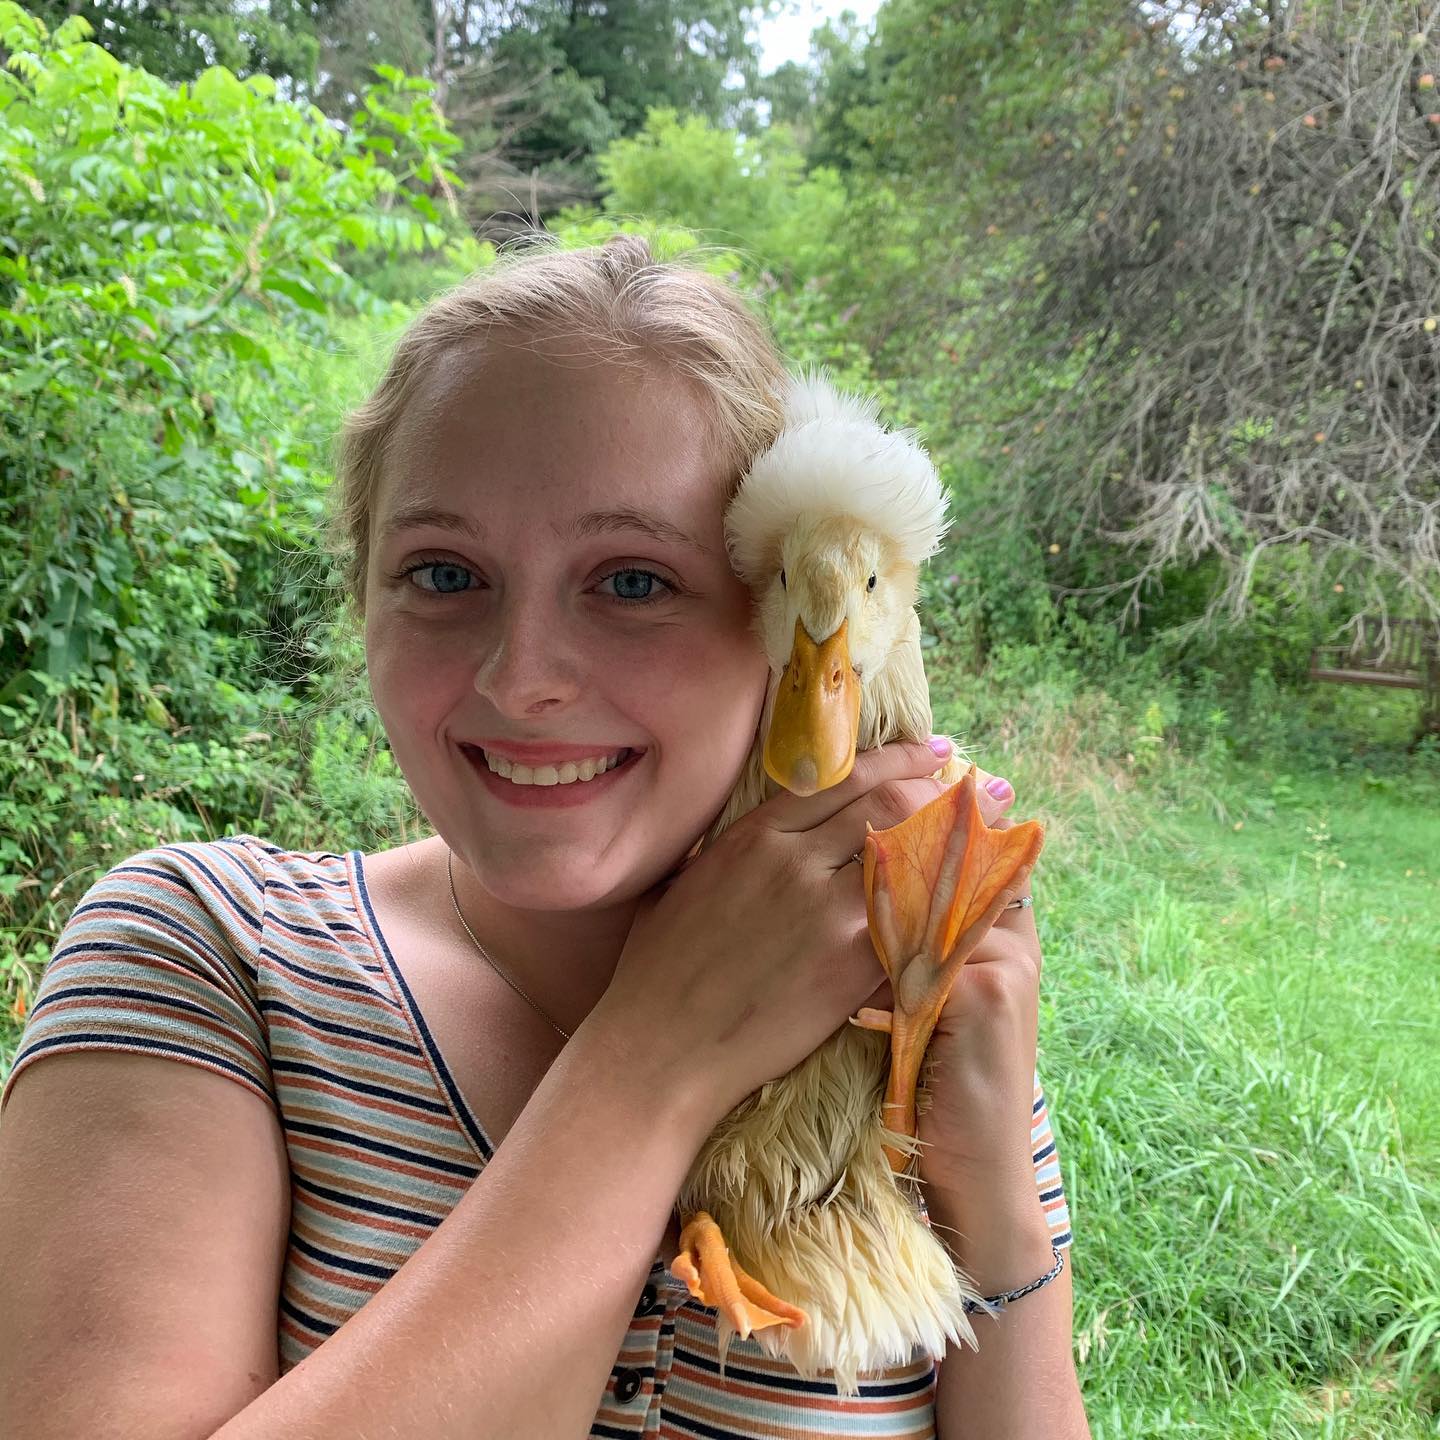 alexa smiling as she holds up a duck next to her face. they're both 